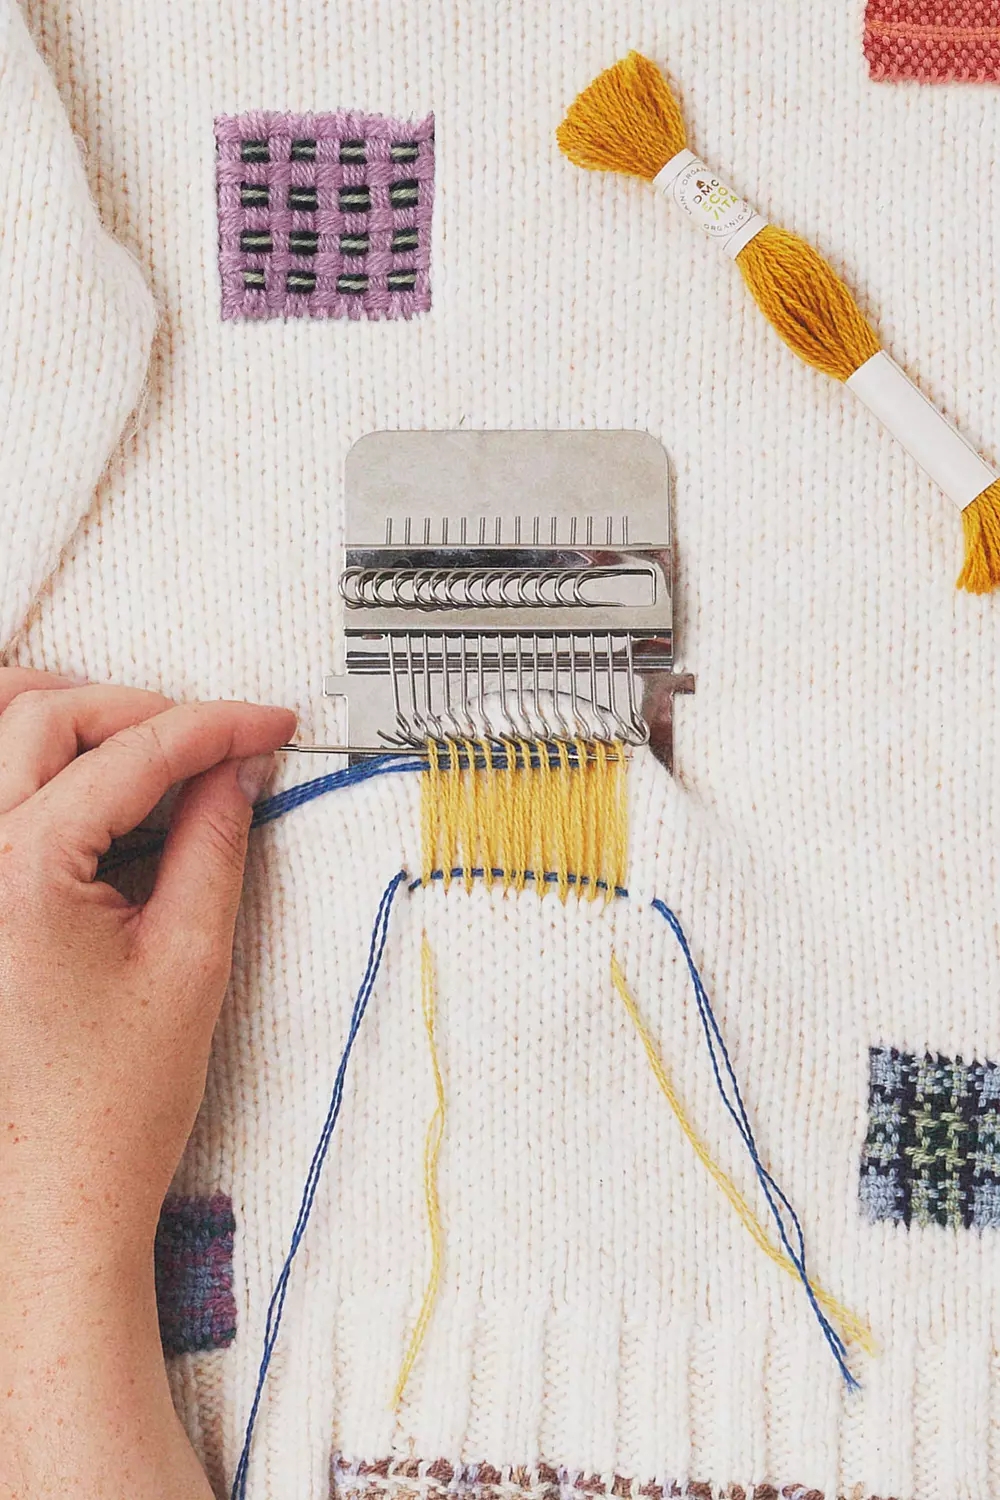 DMC Machine Embroidery Thread at Little Knits